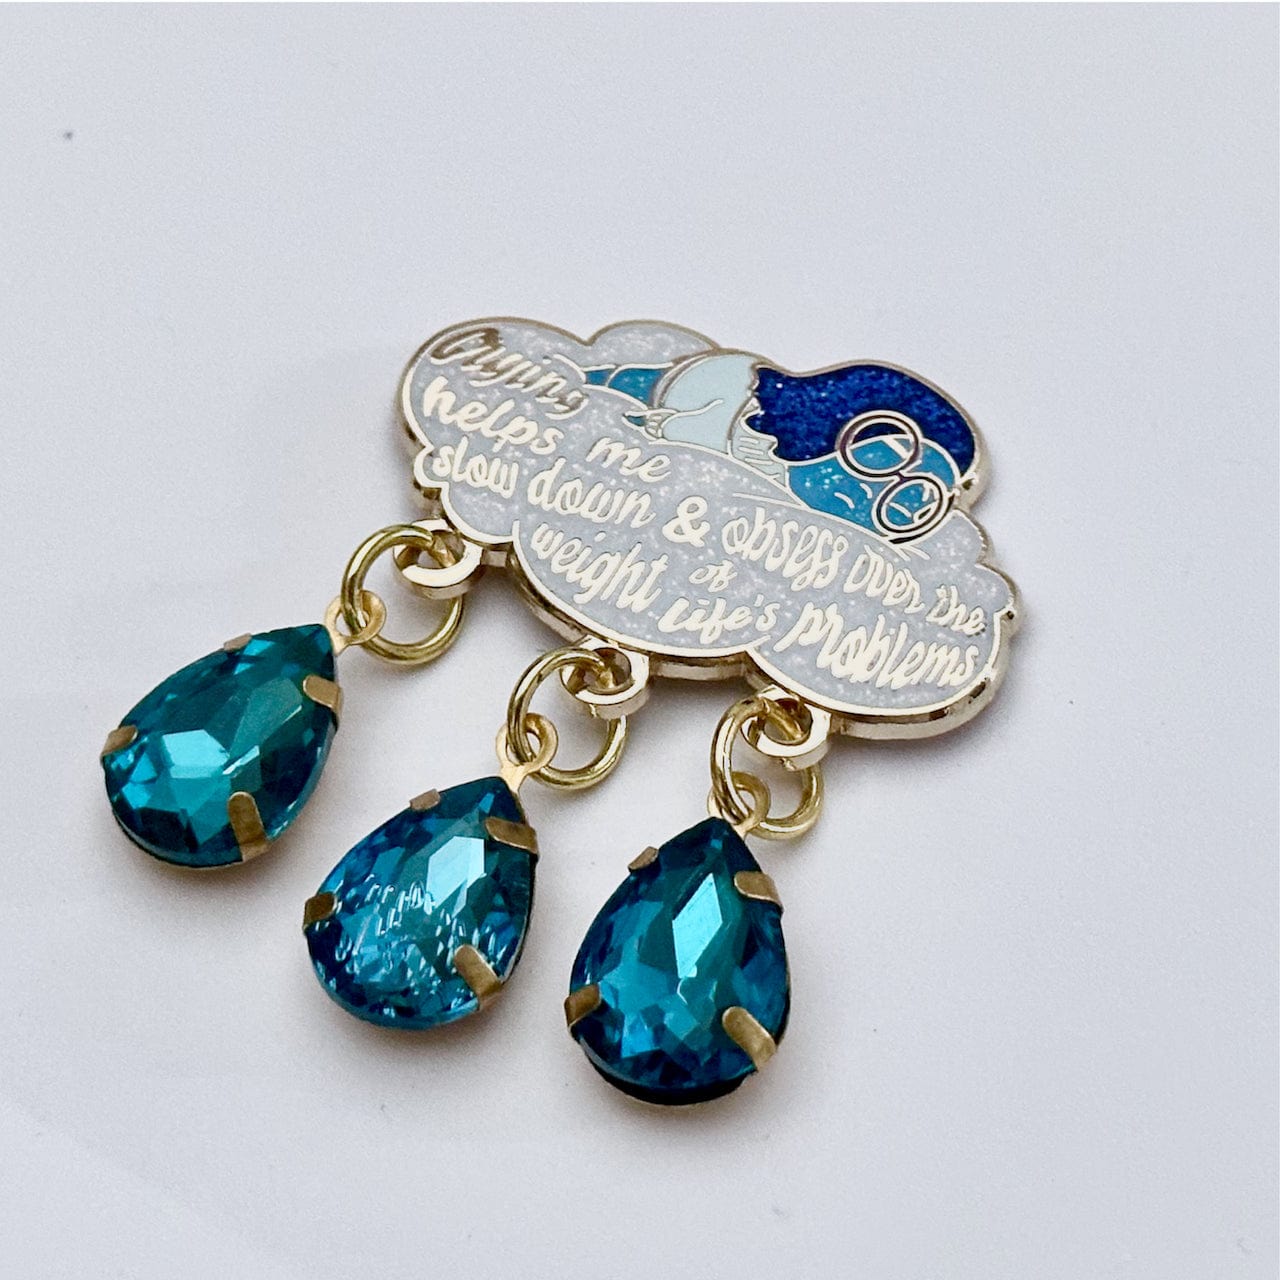 Pinbuds Enamel Pin (patreon) Sadness crystal tears pin featuring quote  "Crying helps me slow down and obsess over the weight of life's problems." (limited edition)